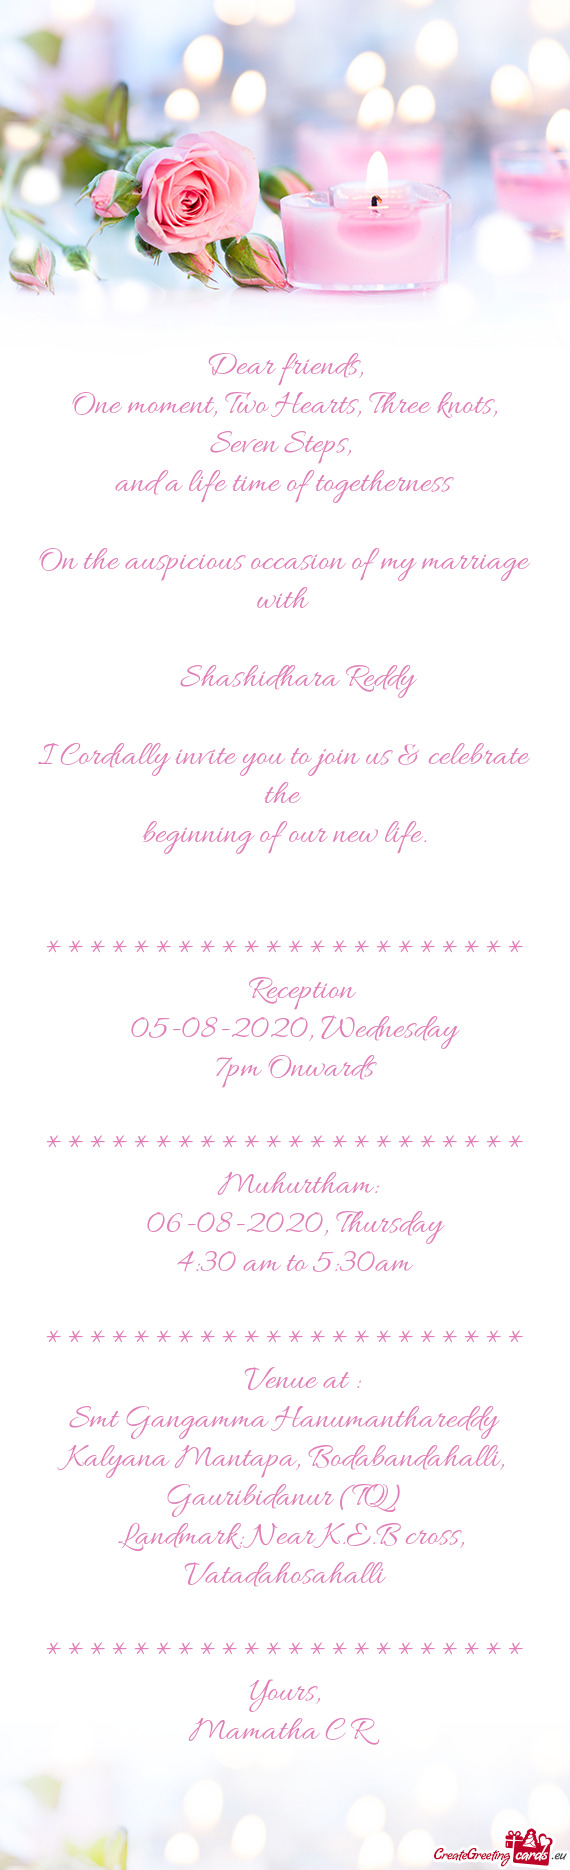 Hara Reddy
 
 I Cordially invite you to join us & celebrate the 
 beginning of our new life